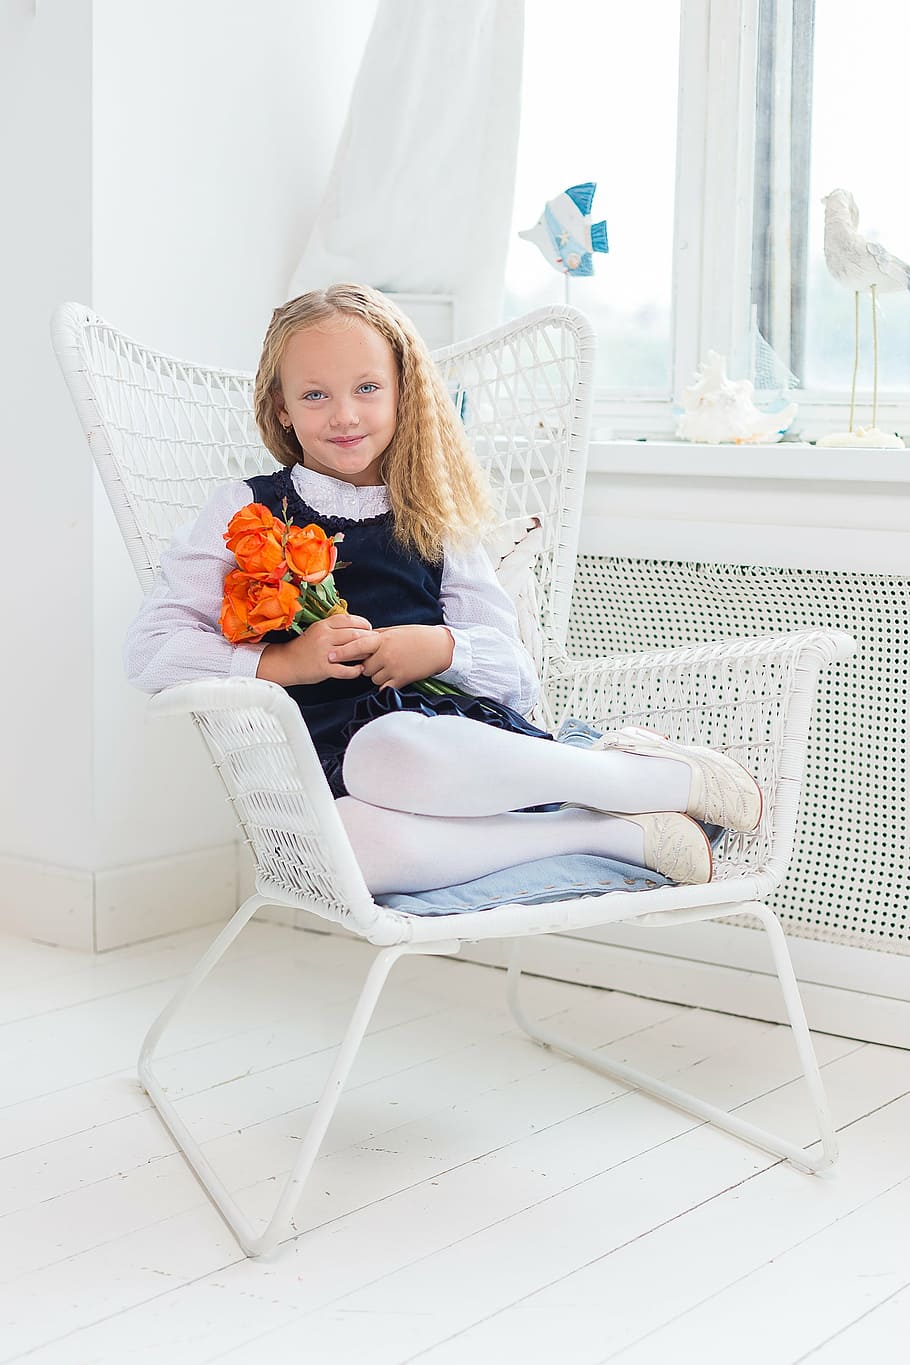 girl, holds, orange, rose, flowers, sitting, white, metal armchair, young, blue eyes